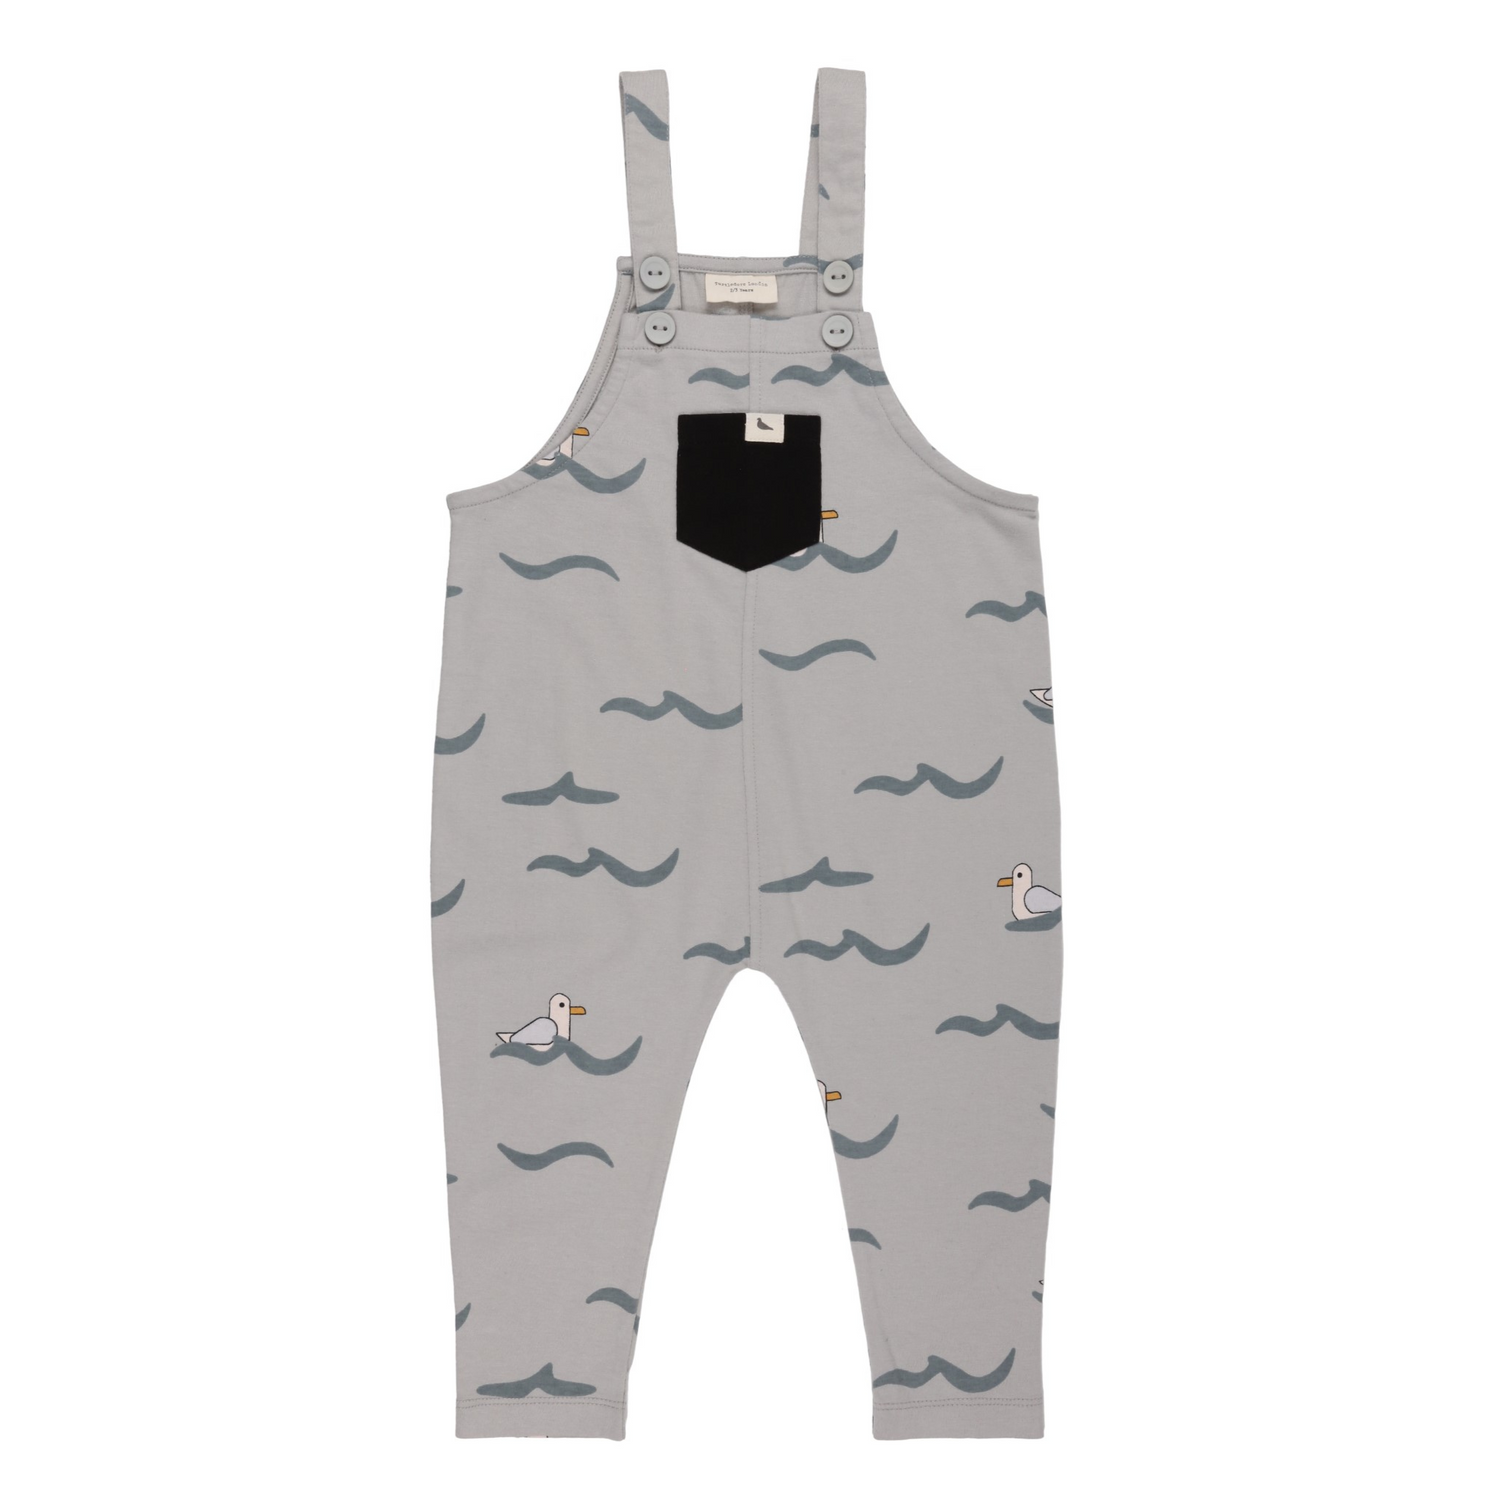 Seagull dungarees